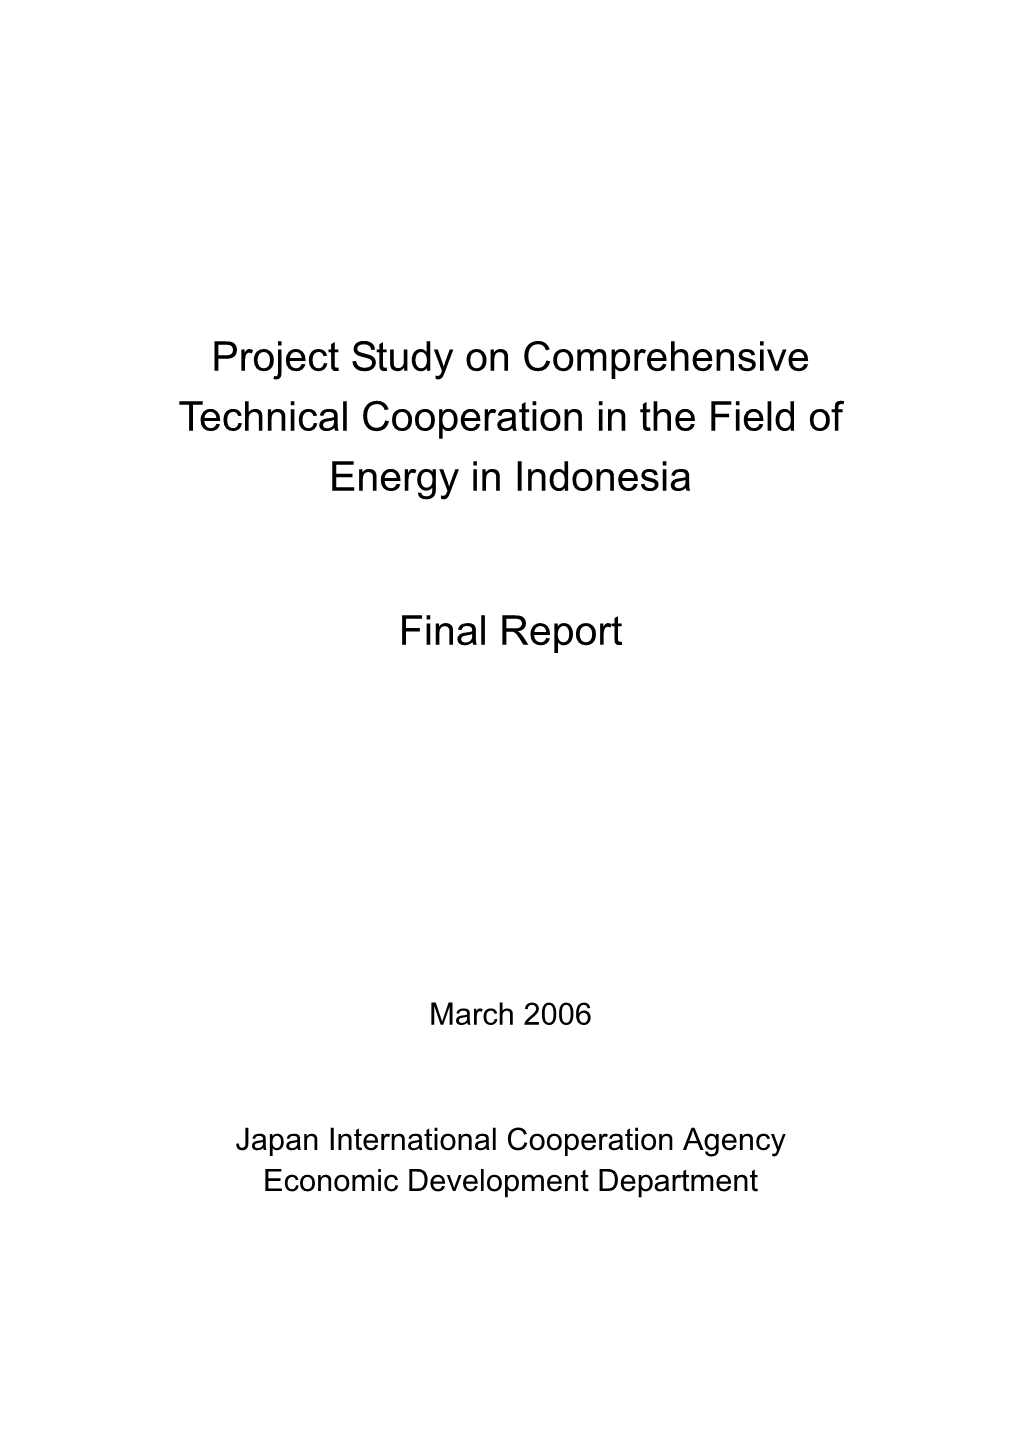 Project Study on Comprehensive Technical Cooperation in the Field of Energy in Indonesia Final Report